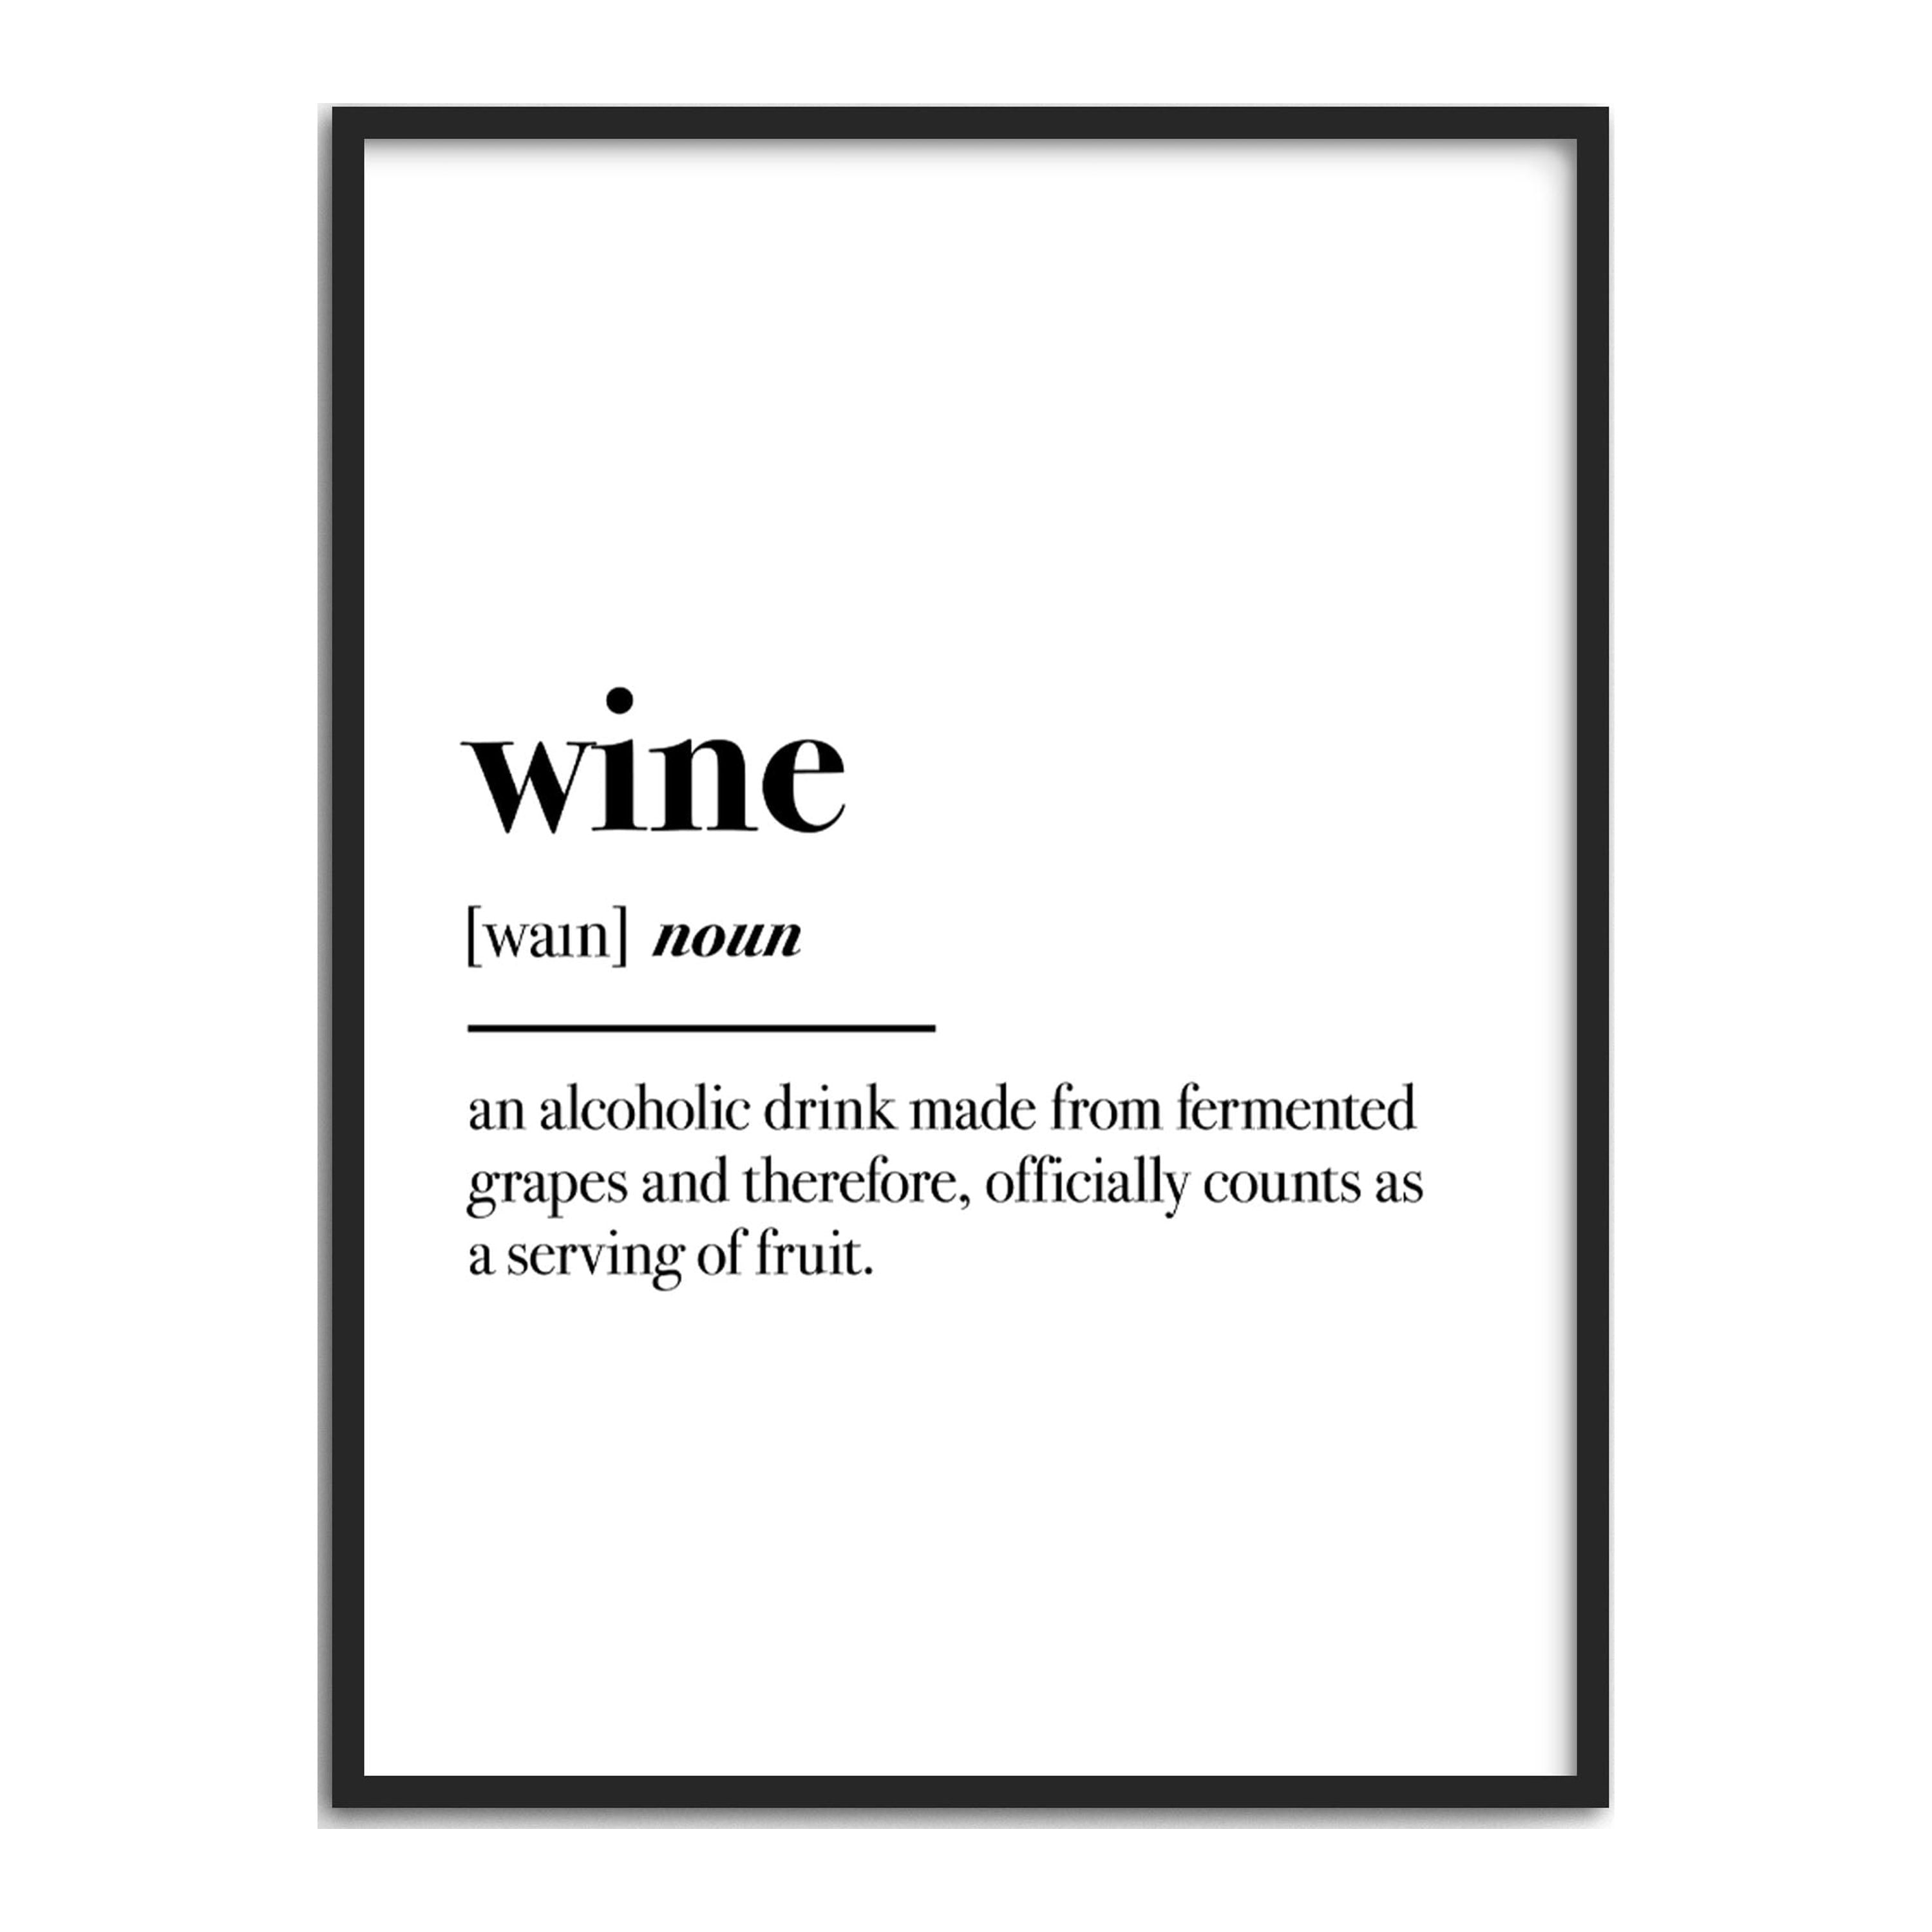 Hues　–　For　Posters　Prints　Wine　Wall　Wine　12”x16”　Art　Theme　Funny　Wall　Wine　Art　Wall　Decor　Wall　Quotes　Haus　Decor　College　and　Funny　UNFRAMED